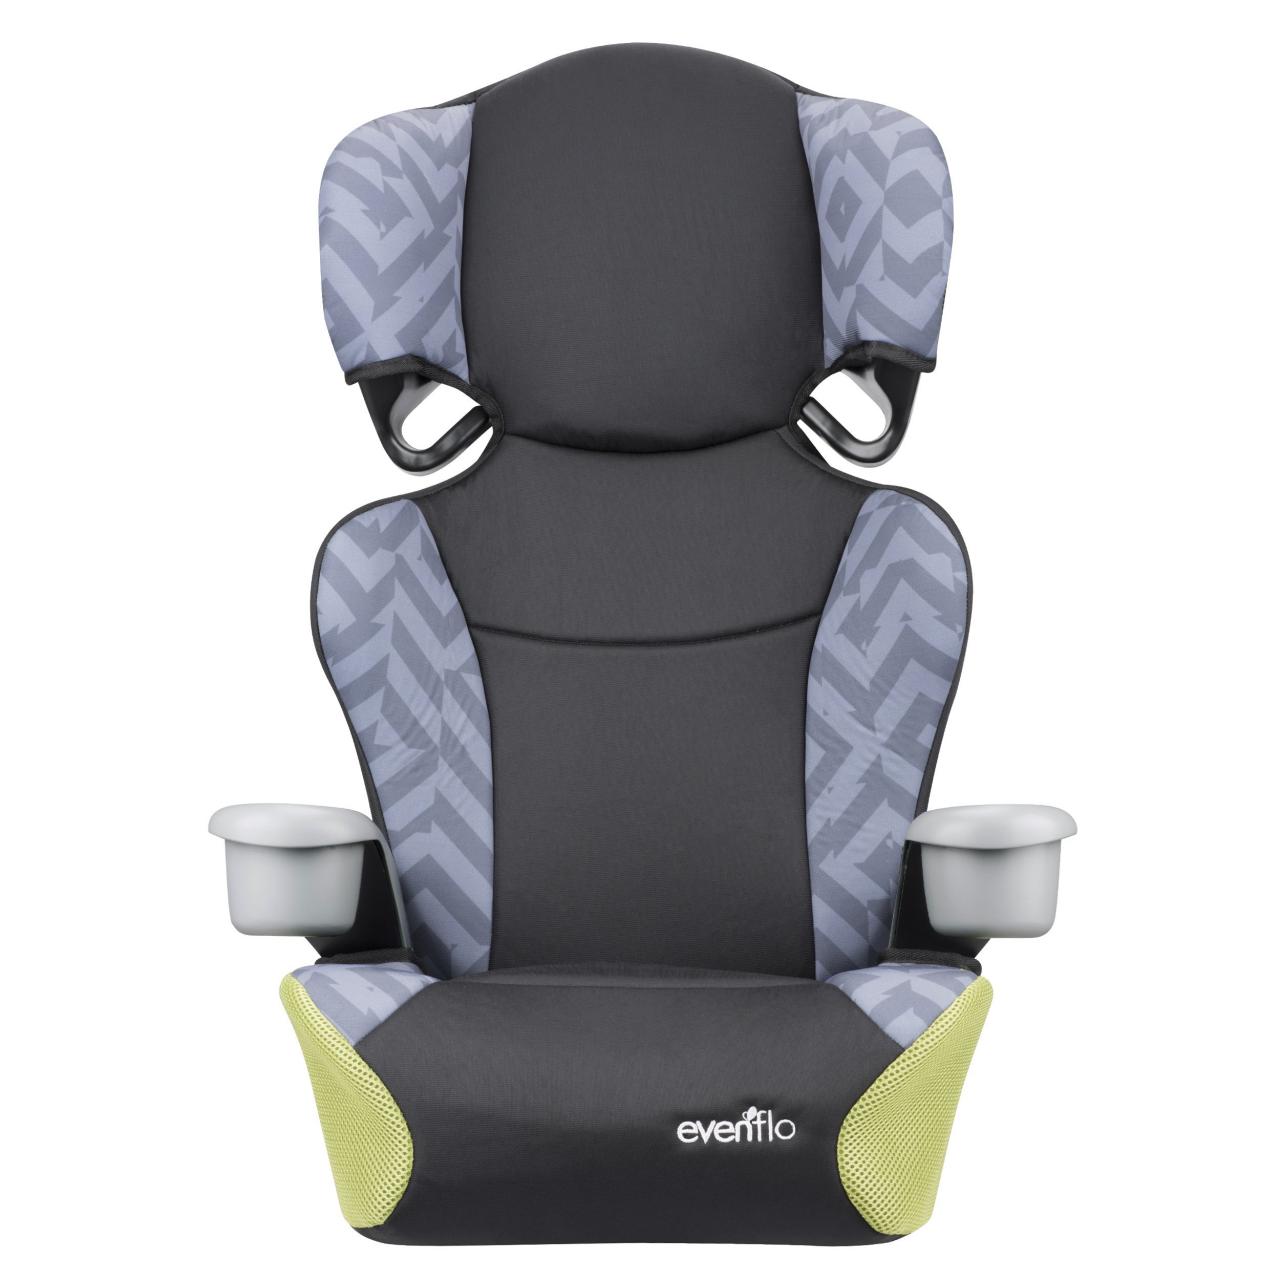 Evenflo Big Kid/Amp Review - Car Seats For The Littles